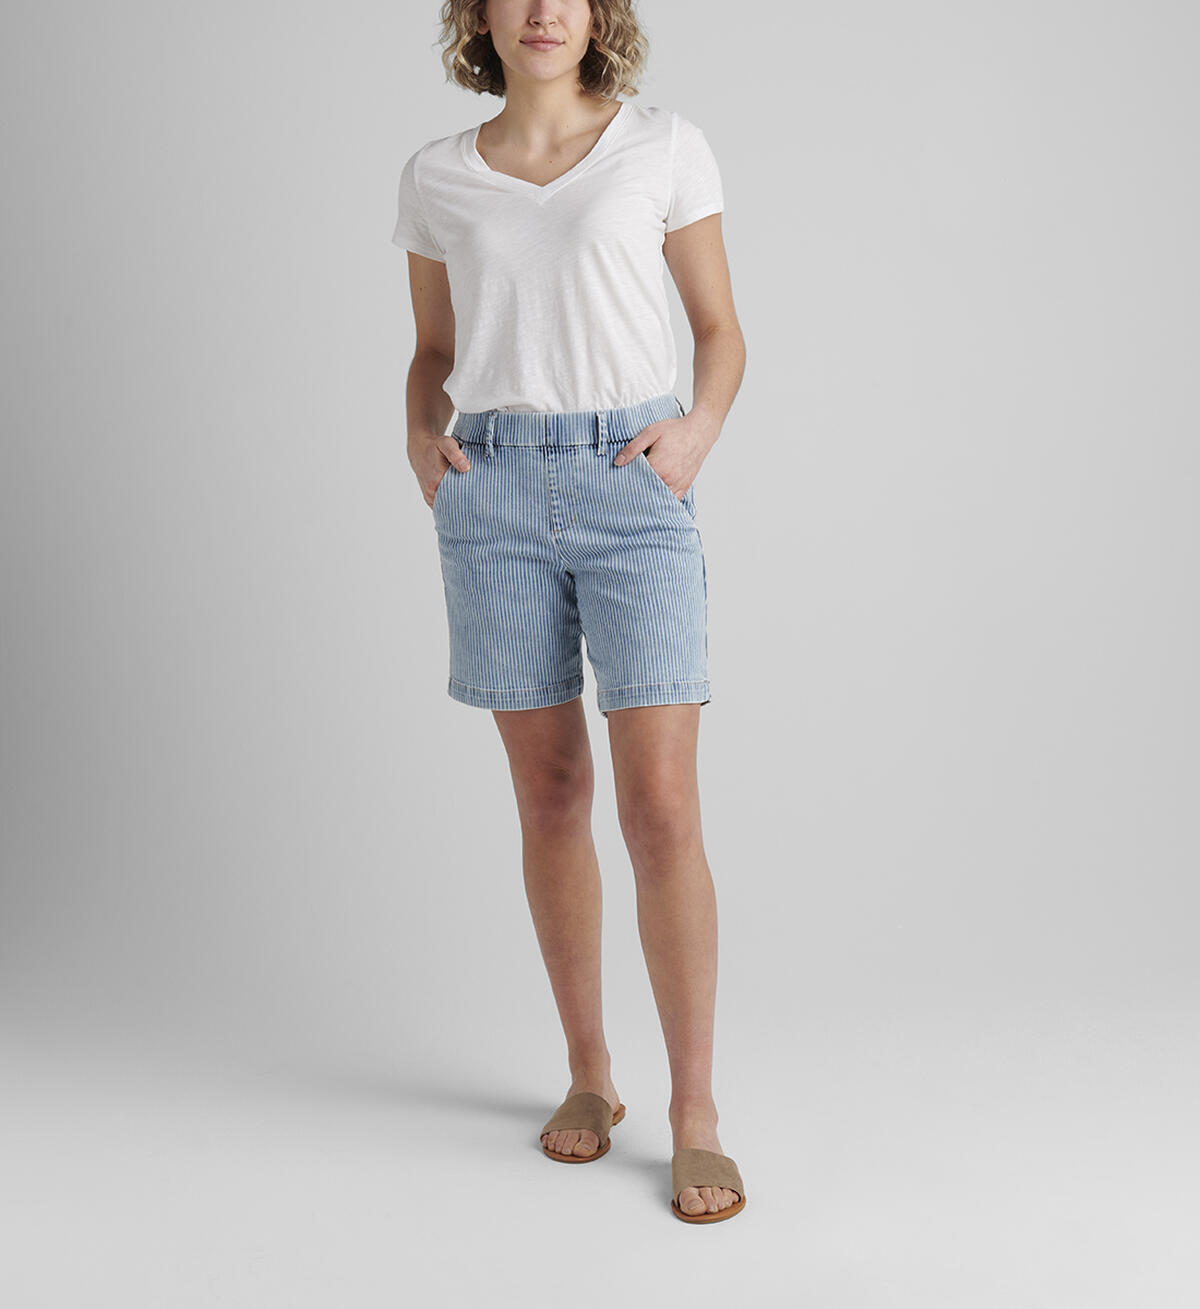 Maddie Mid Rise 8-inch Pull-On Short Petite, , hi-res image number 0